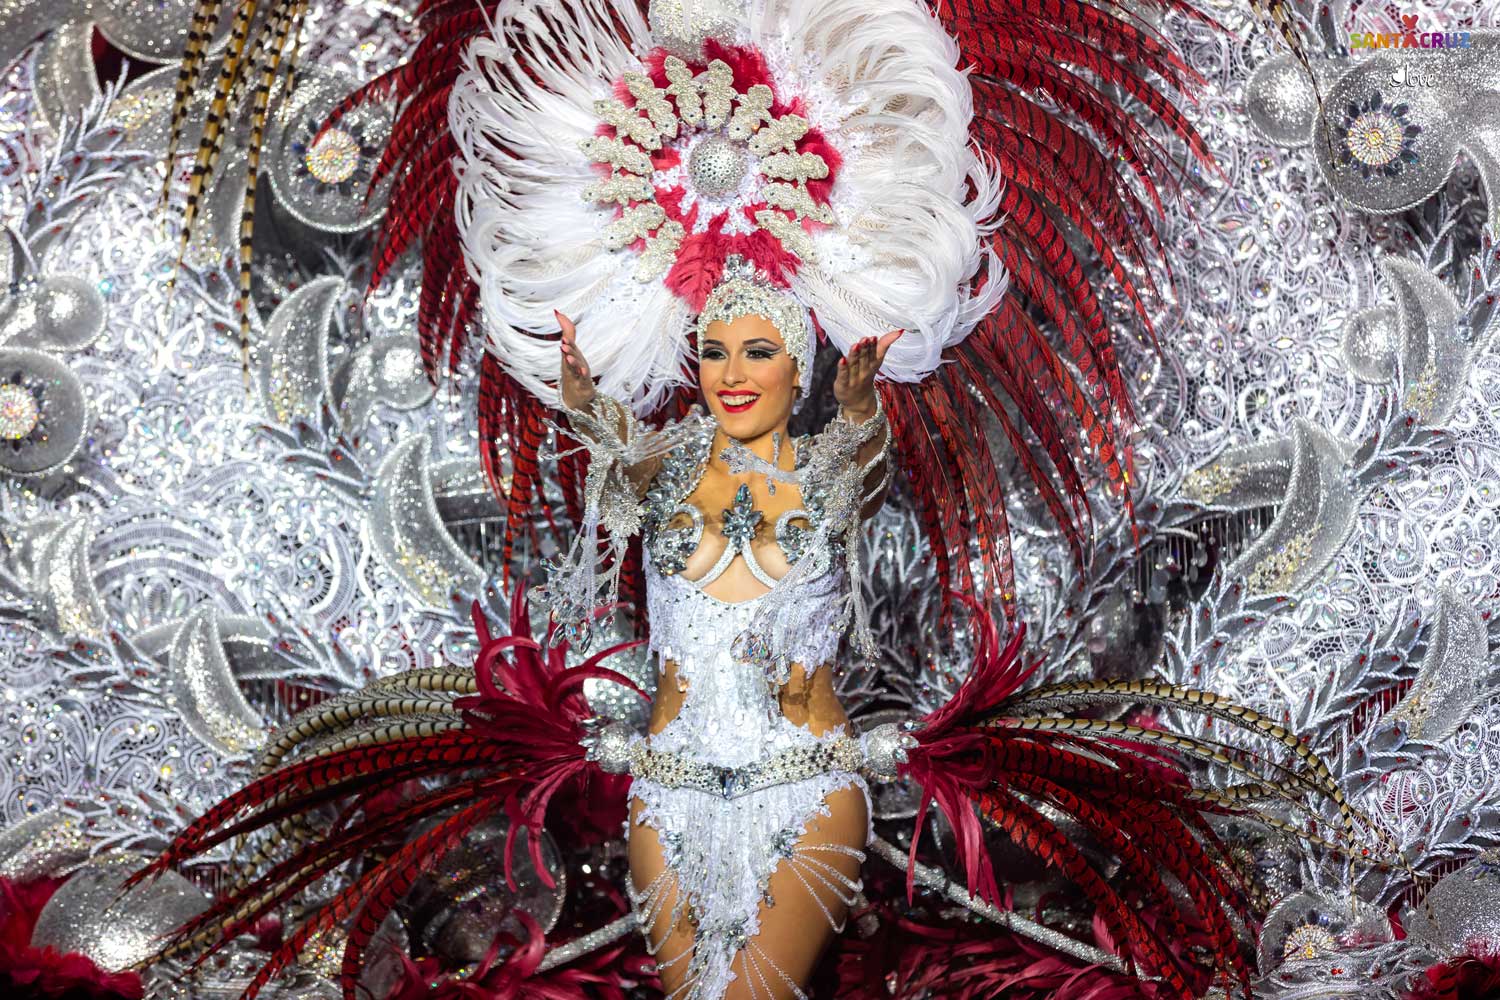 Tenerife Carnival: Election of the Carnival Queen